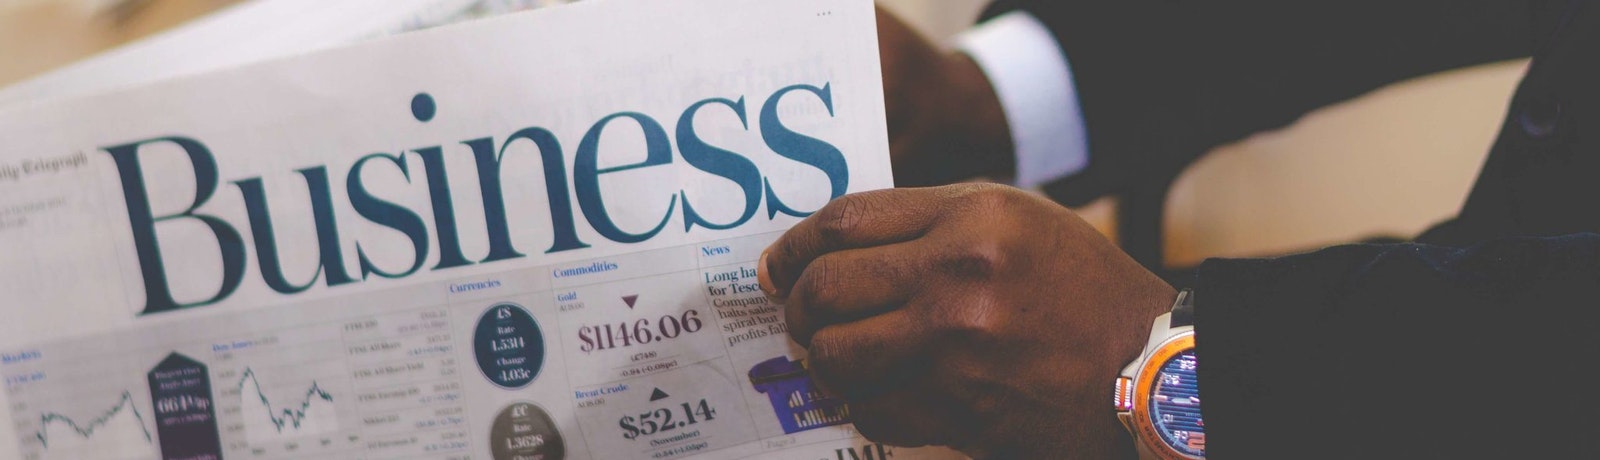 a pair hands holding the business section of the newspaper